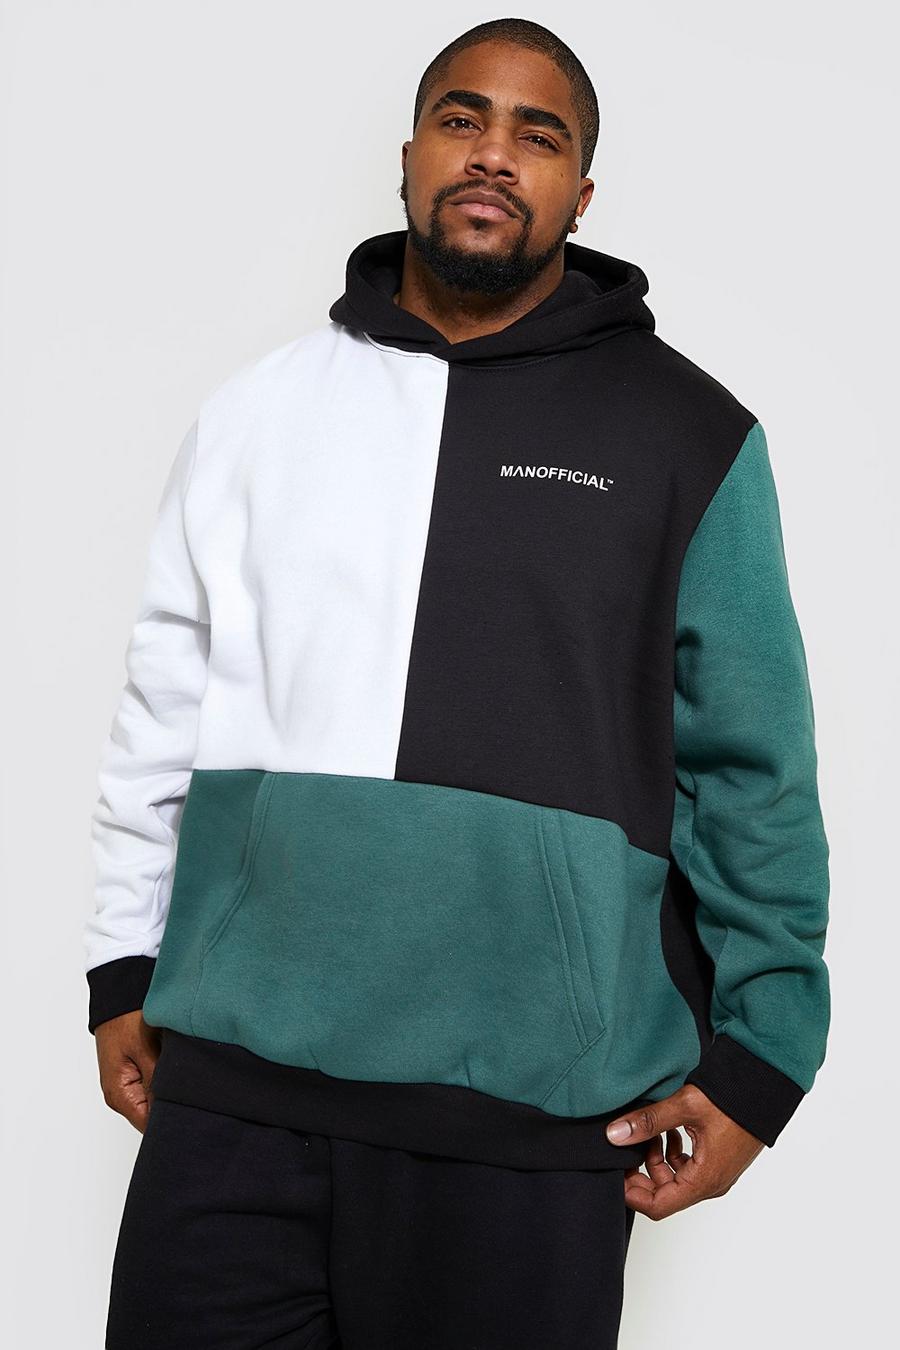 Plus Man Official Colorblock Hoodie, Forest green